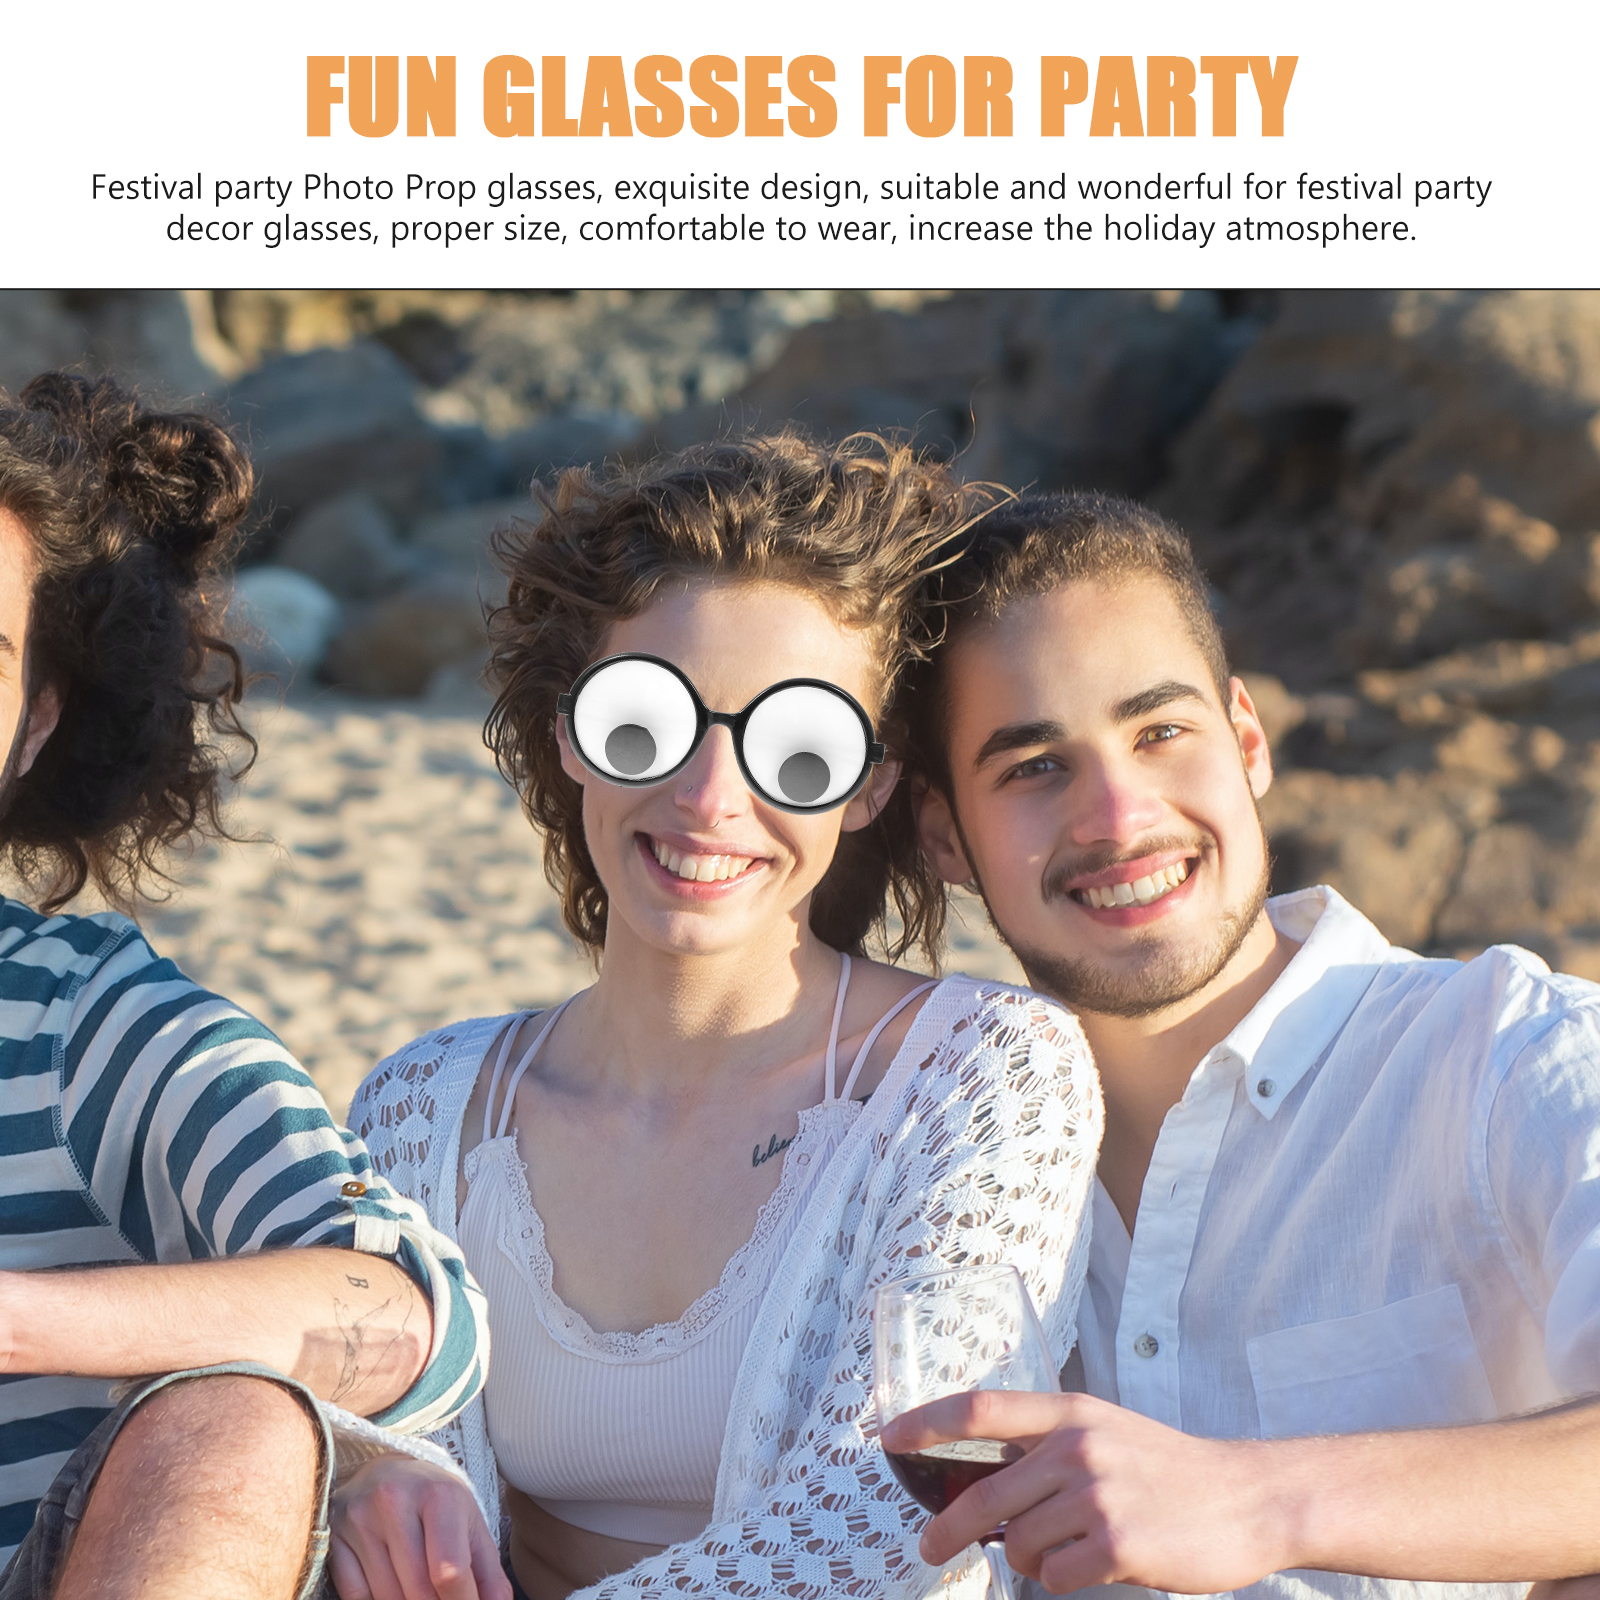 Party Supply Festival Glasses Prop Movable Eyeball Safety Glases Fashionable Halloween Plastic - image 4 of 6